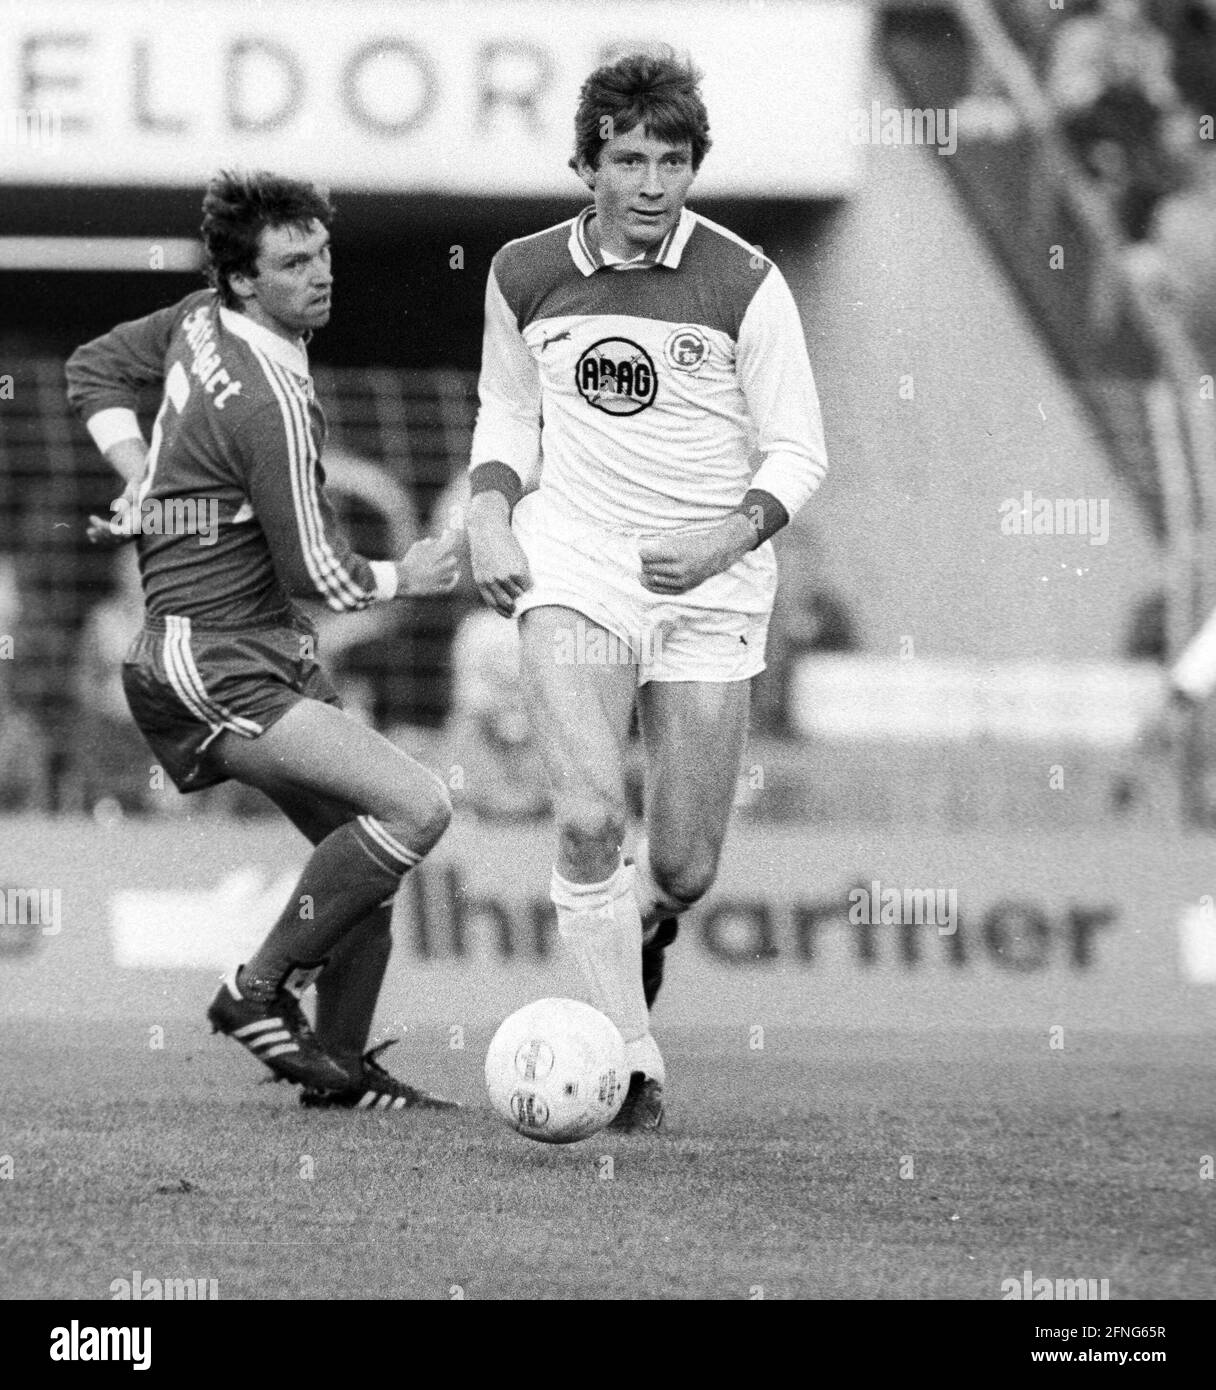 Atli Edvaldsson (Fortuna Düsseldorf) in the match against VFB Stuttgart on 29.10.1983. In the background: Niedermayer (VFB). DFL REGULATIONS PROHIBIT ANY USE OF PHOTOGRAPHS AS IMAGE SEQUENCES AND/OR QUASI-VIDEO [automated translation] Stock Photo